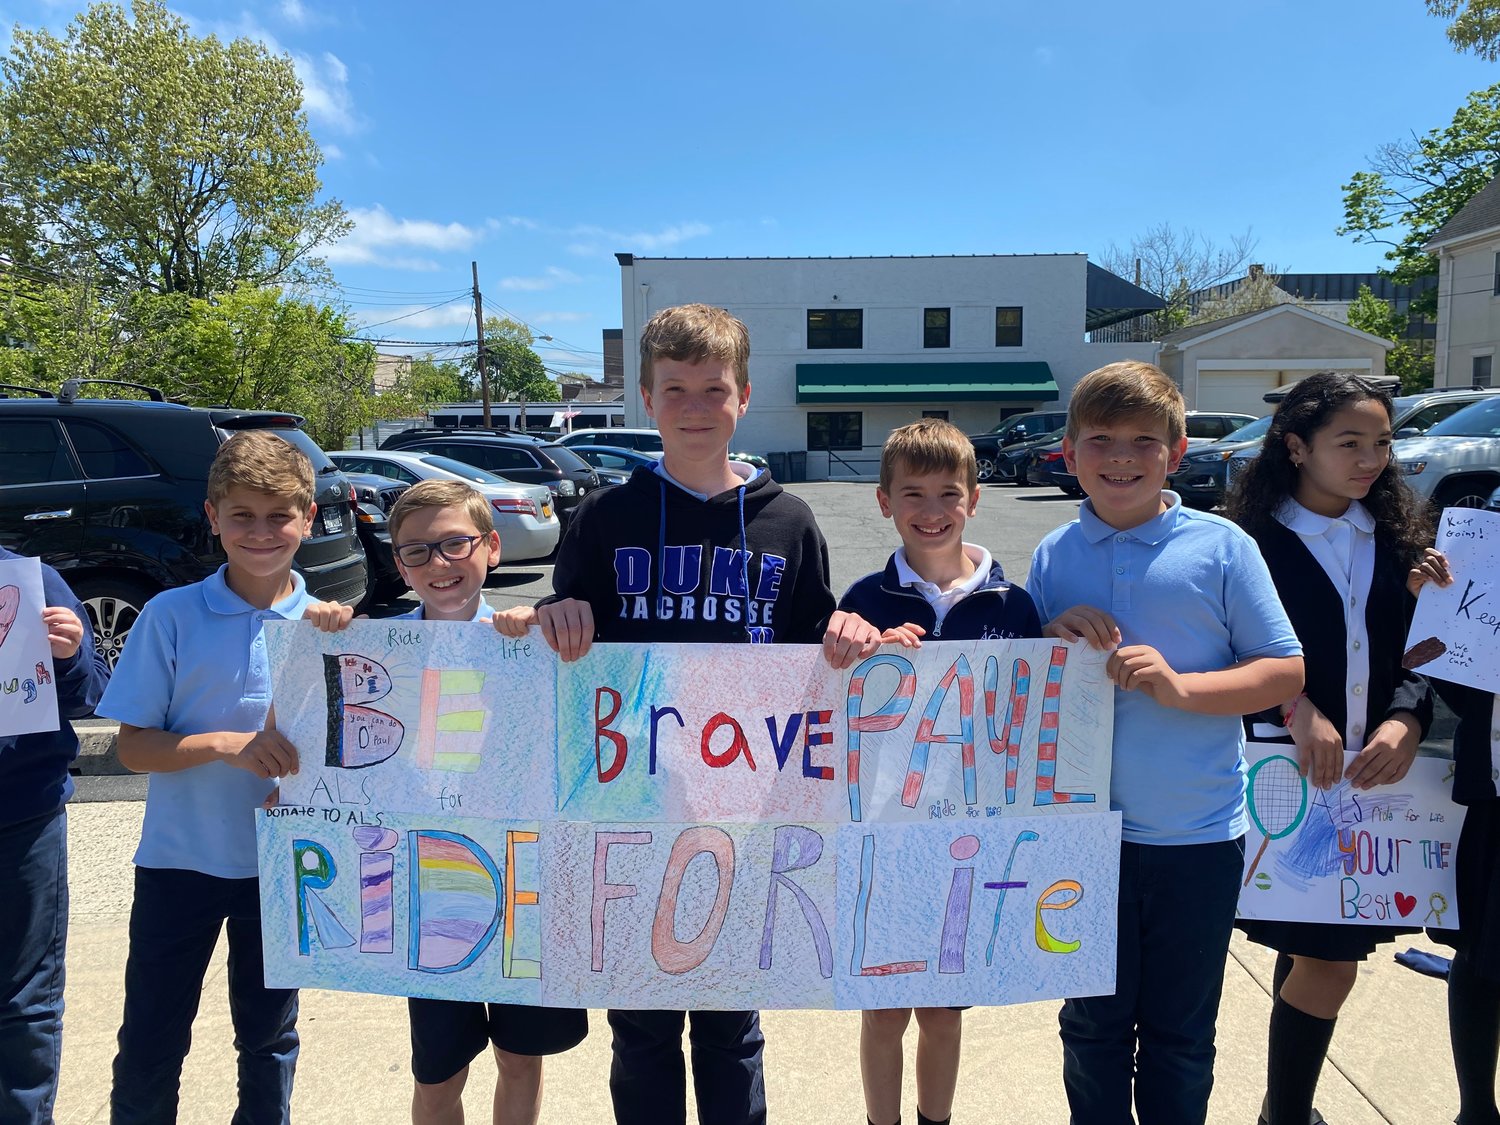 Students Philip, left, Salvatore, Kevin, Jack and John showed the banner they made in support of Paul Weisman and his fight against ALS.